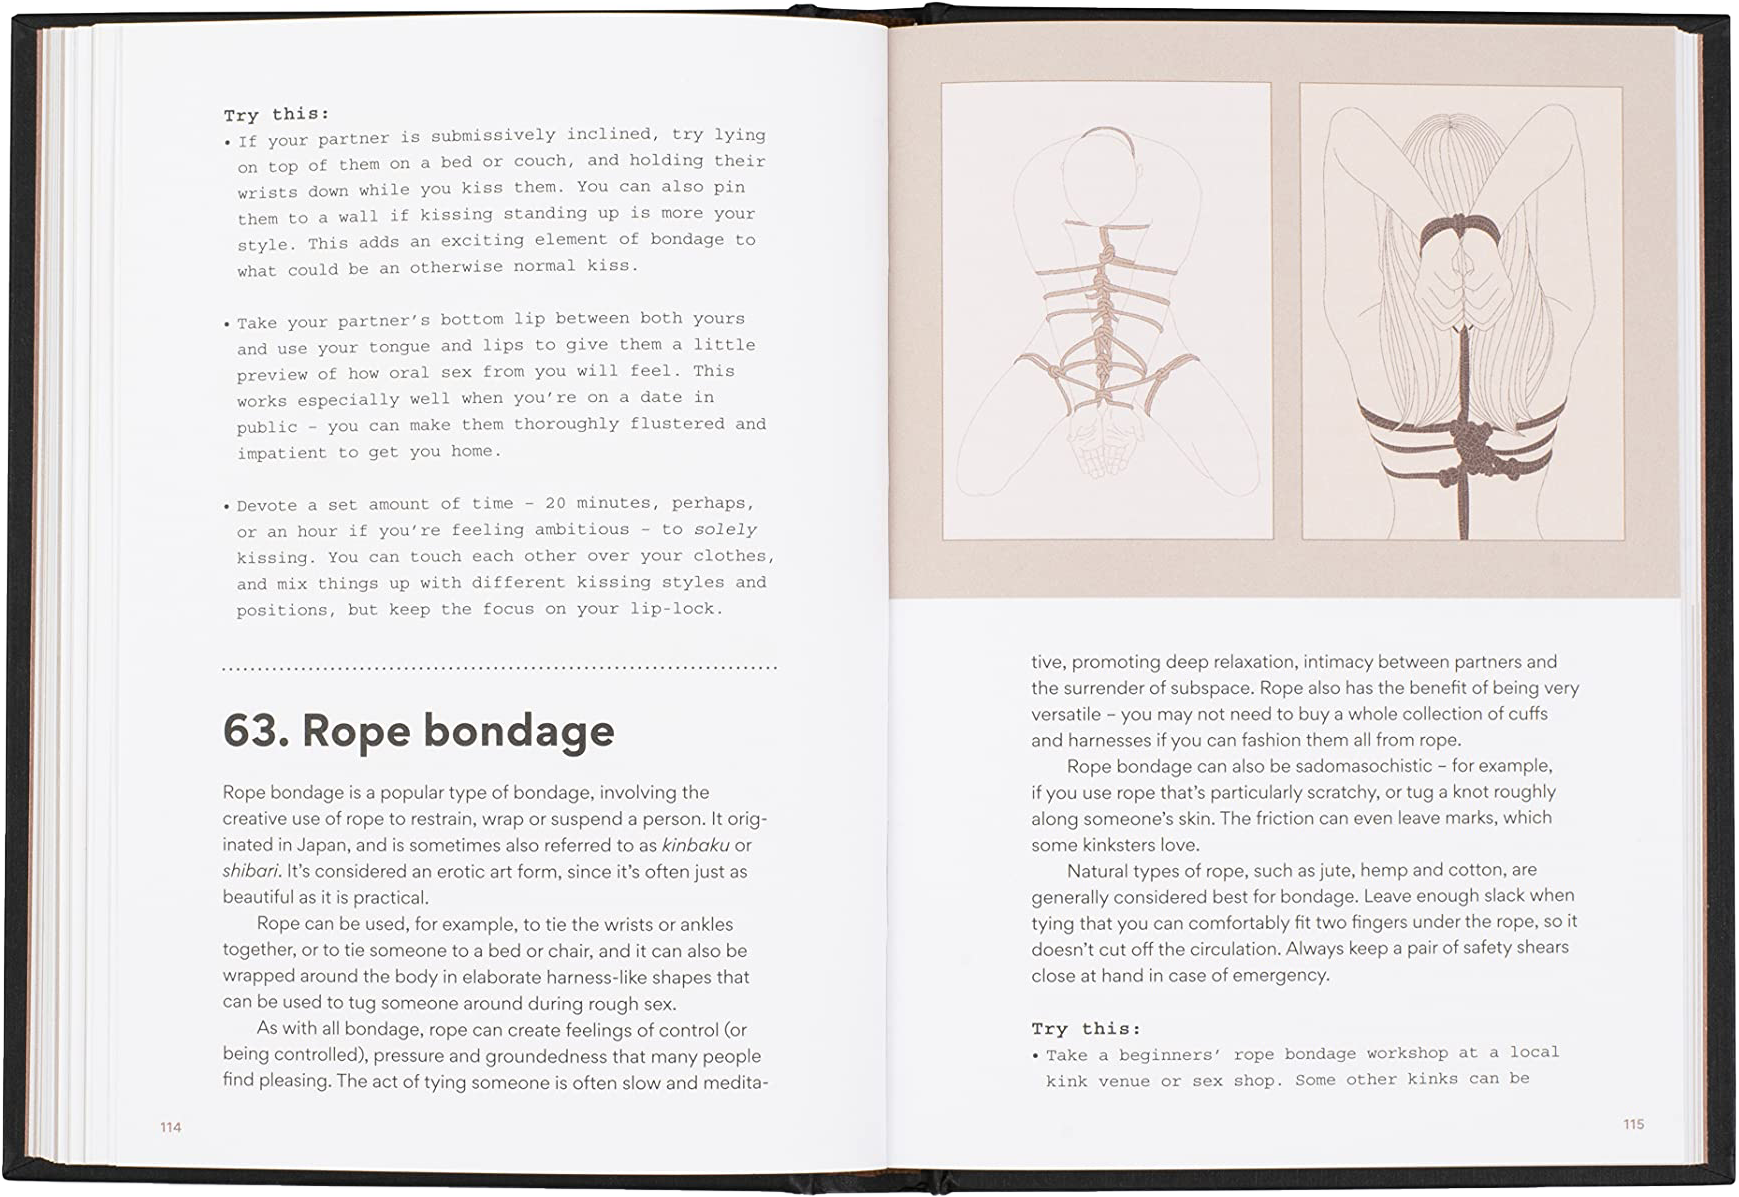 The book open to the ropebondage chapter.